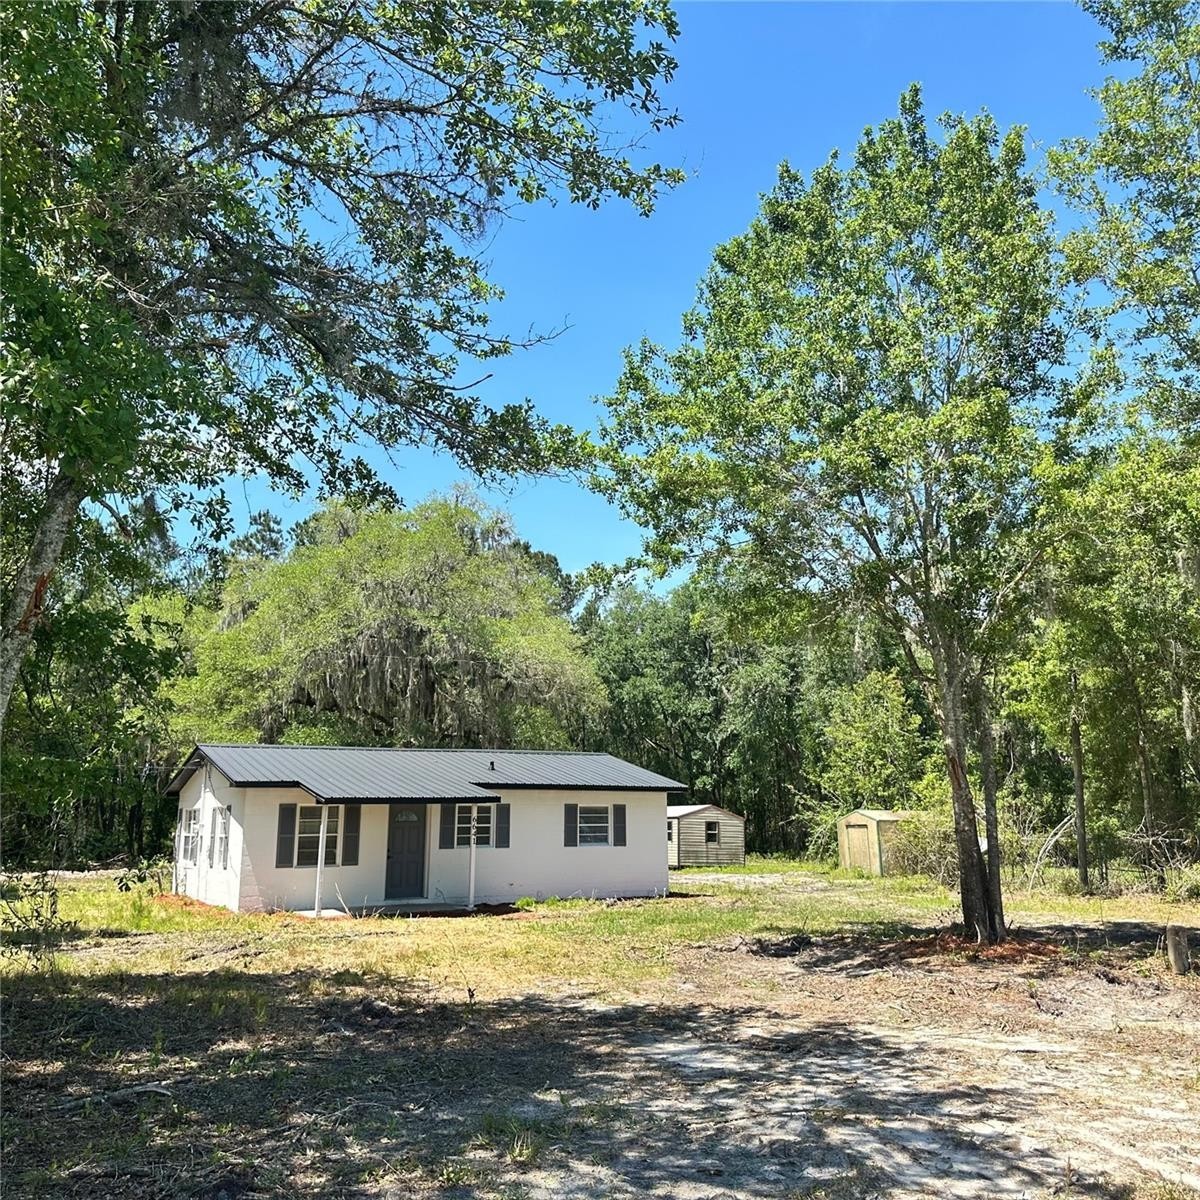 2. 6641 SW County Road 241